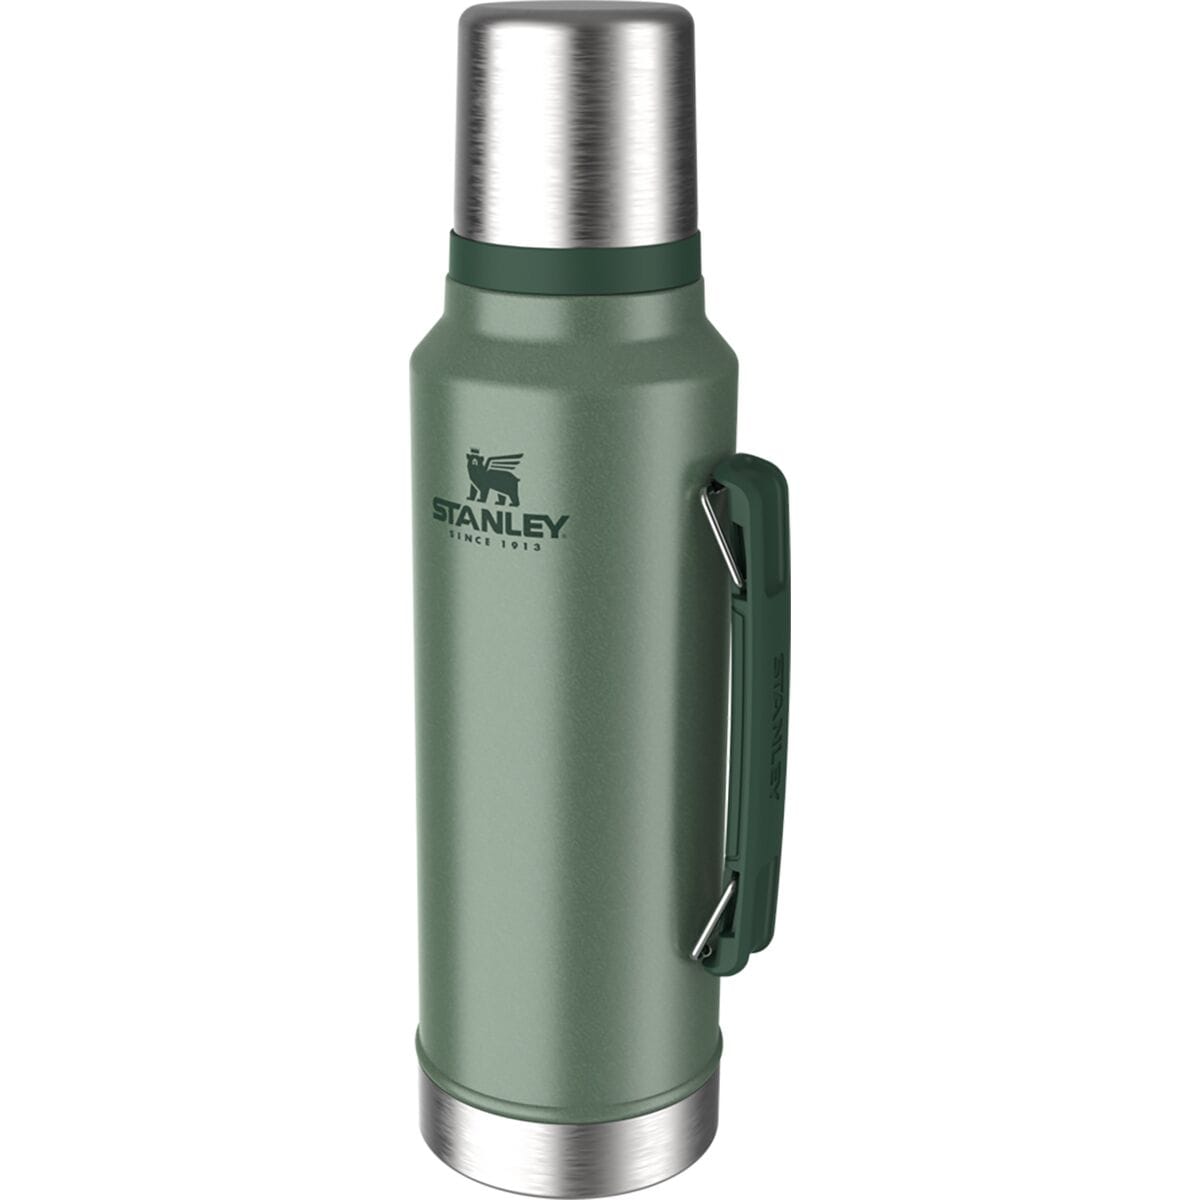 The best thermos flasks for camping, hiking and festivals